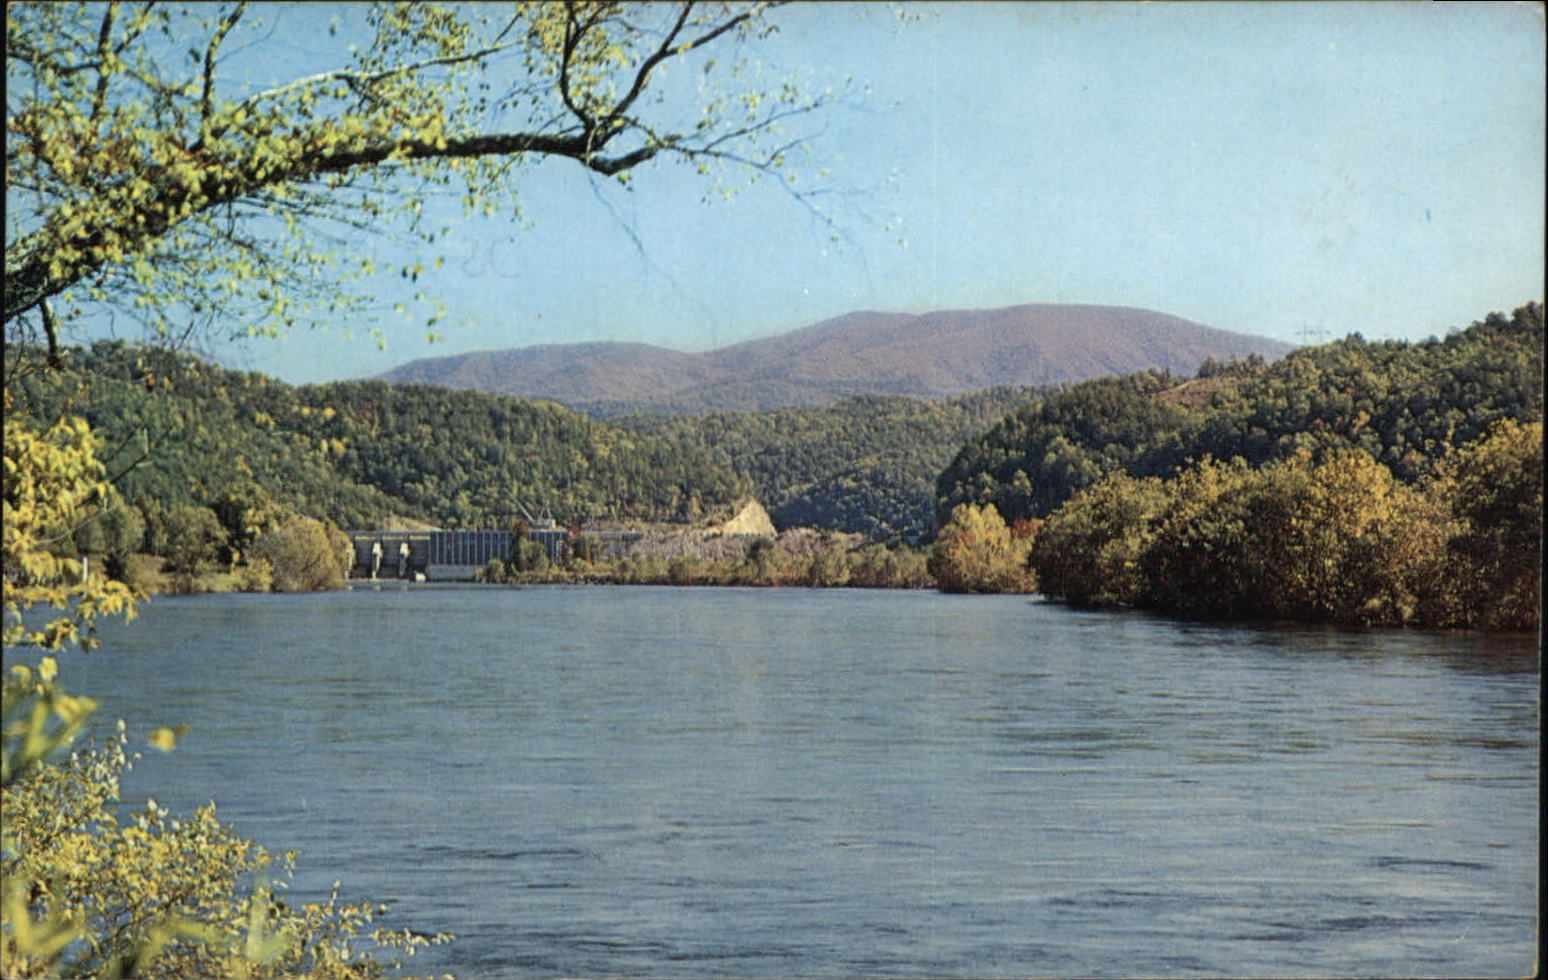 Tallassee TN Great Smoky Mtns Natl Park Little Tennessee River vintage postcard